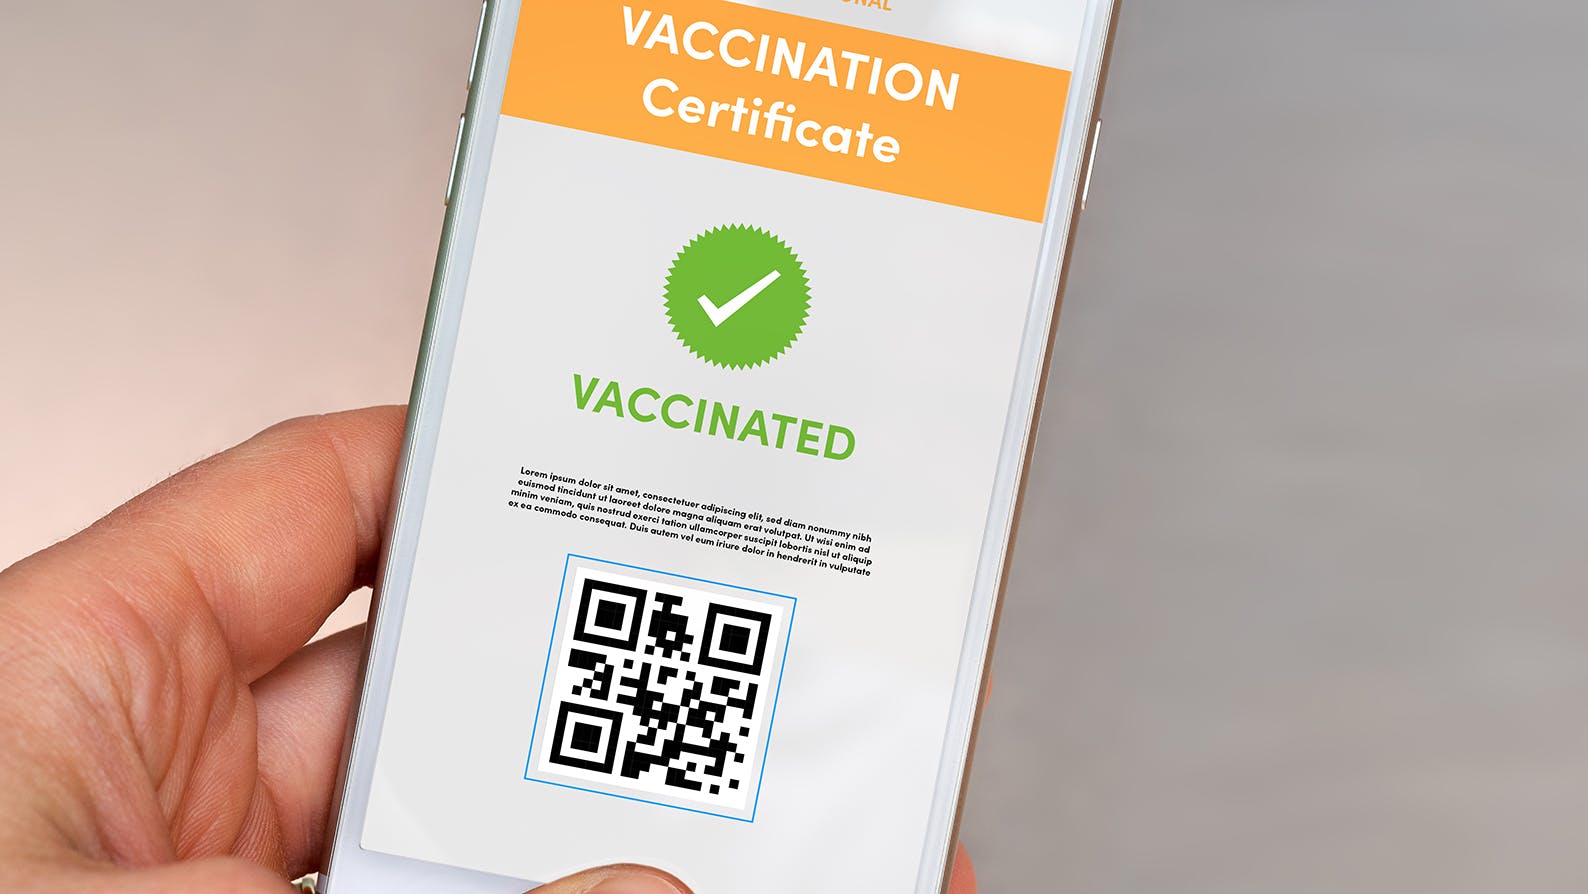 Vaccine certification shown on a phone screen